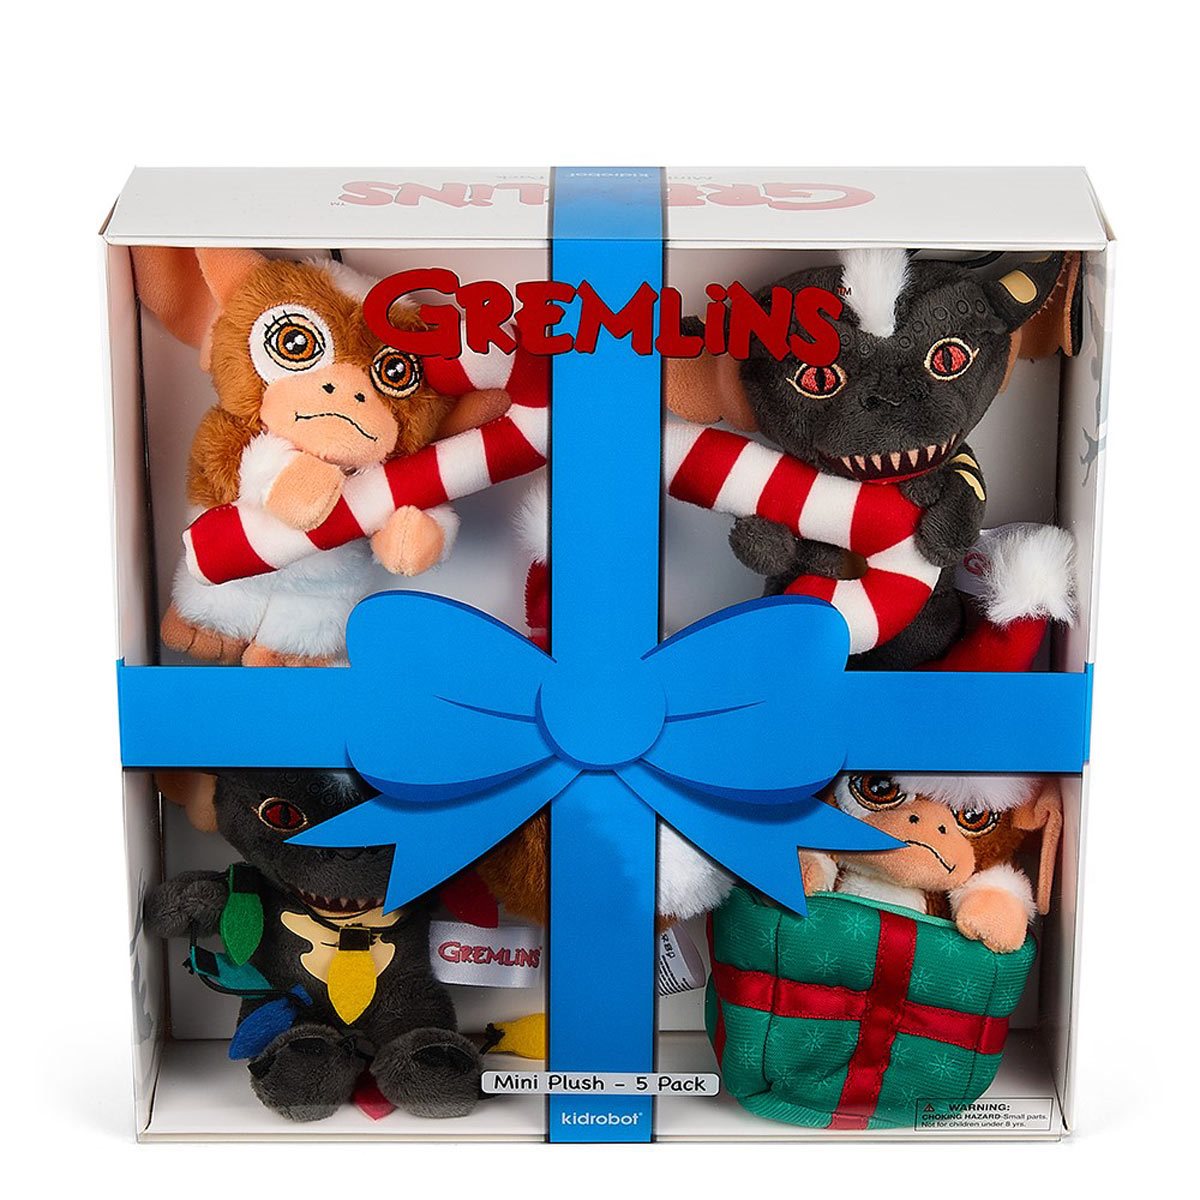 Buy Gizmo Holiday Ornament at Funko.